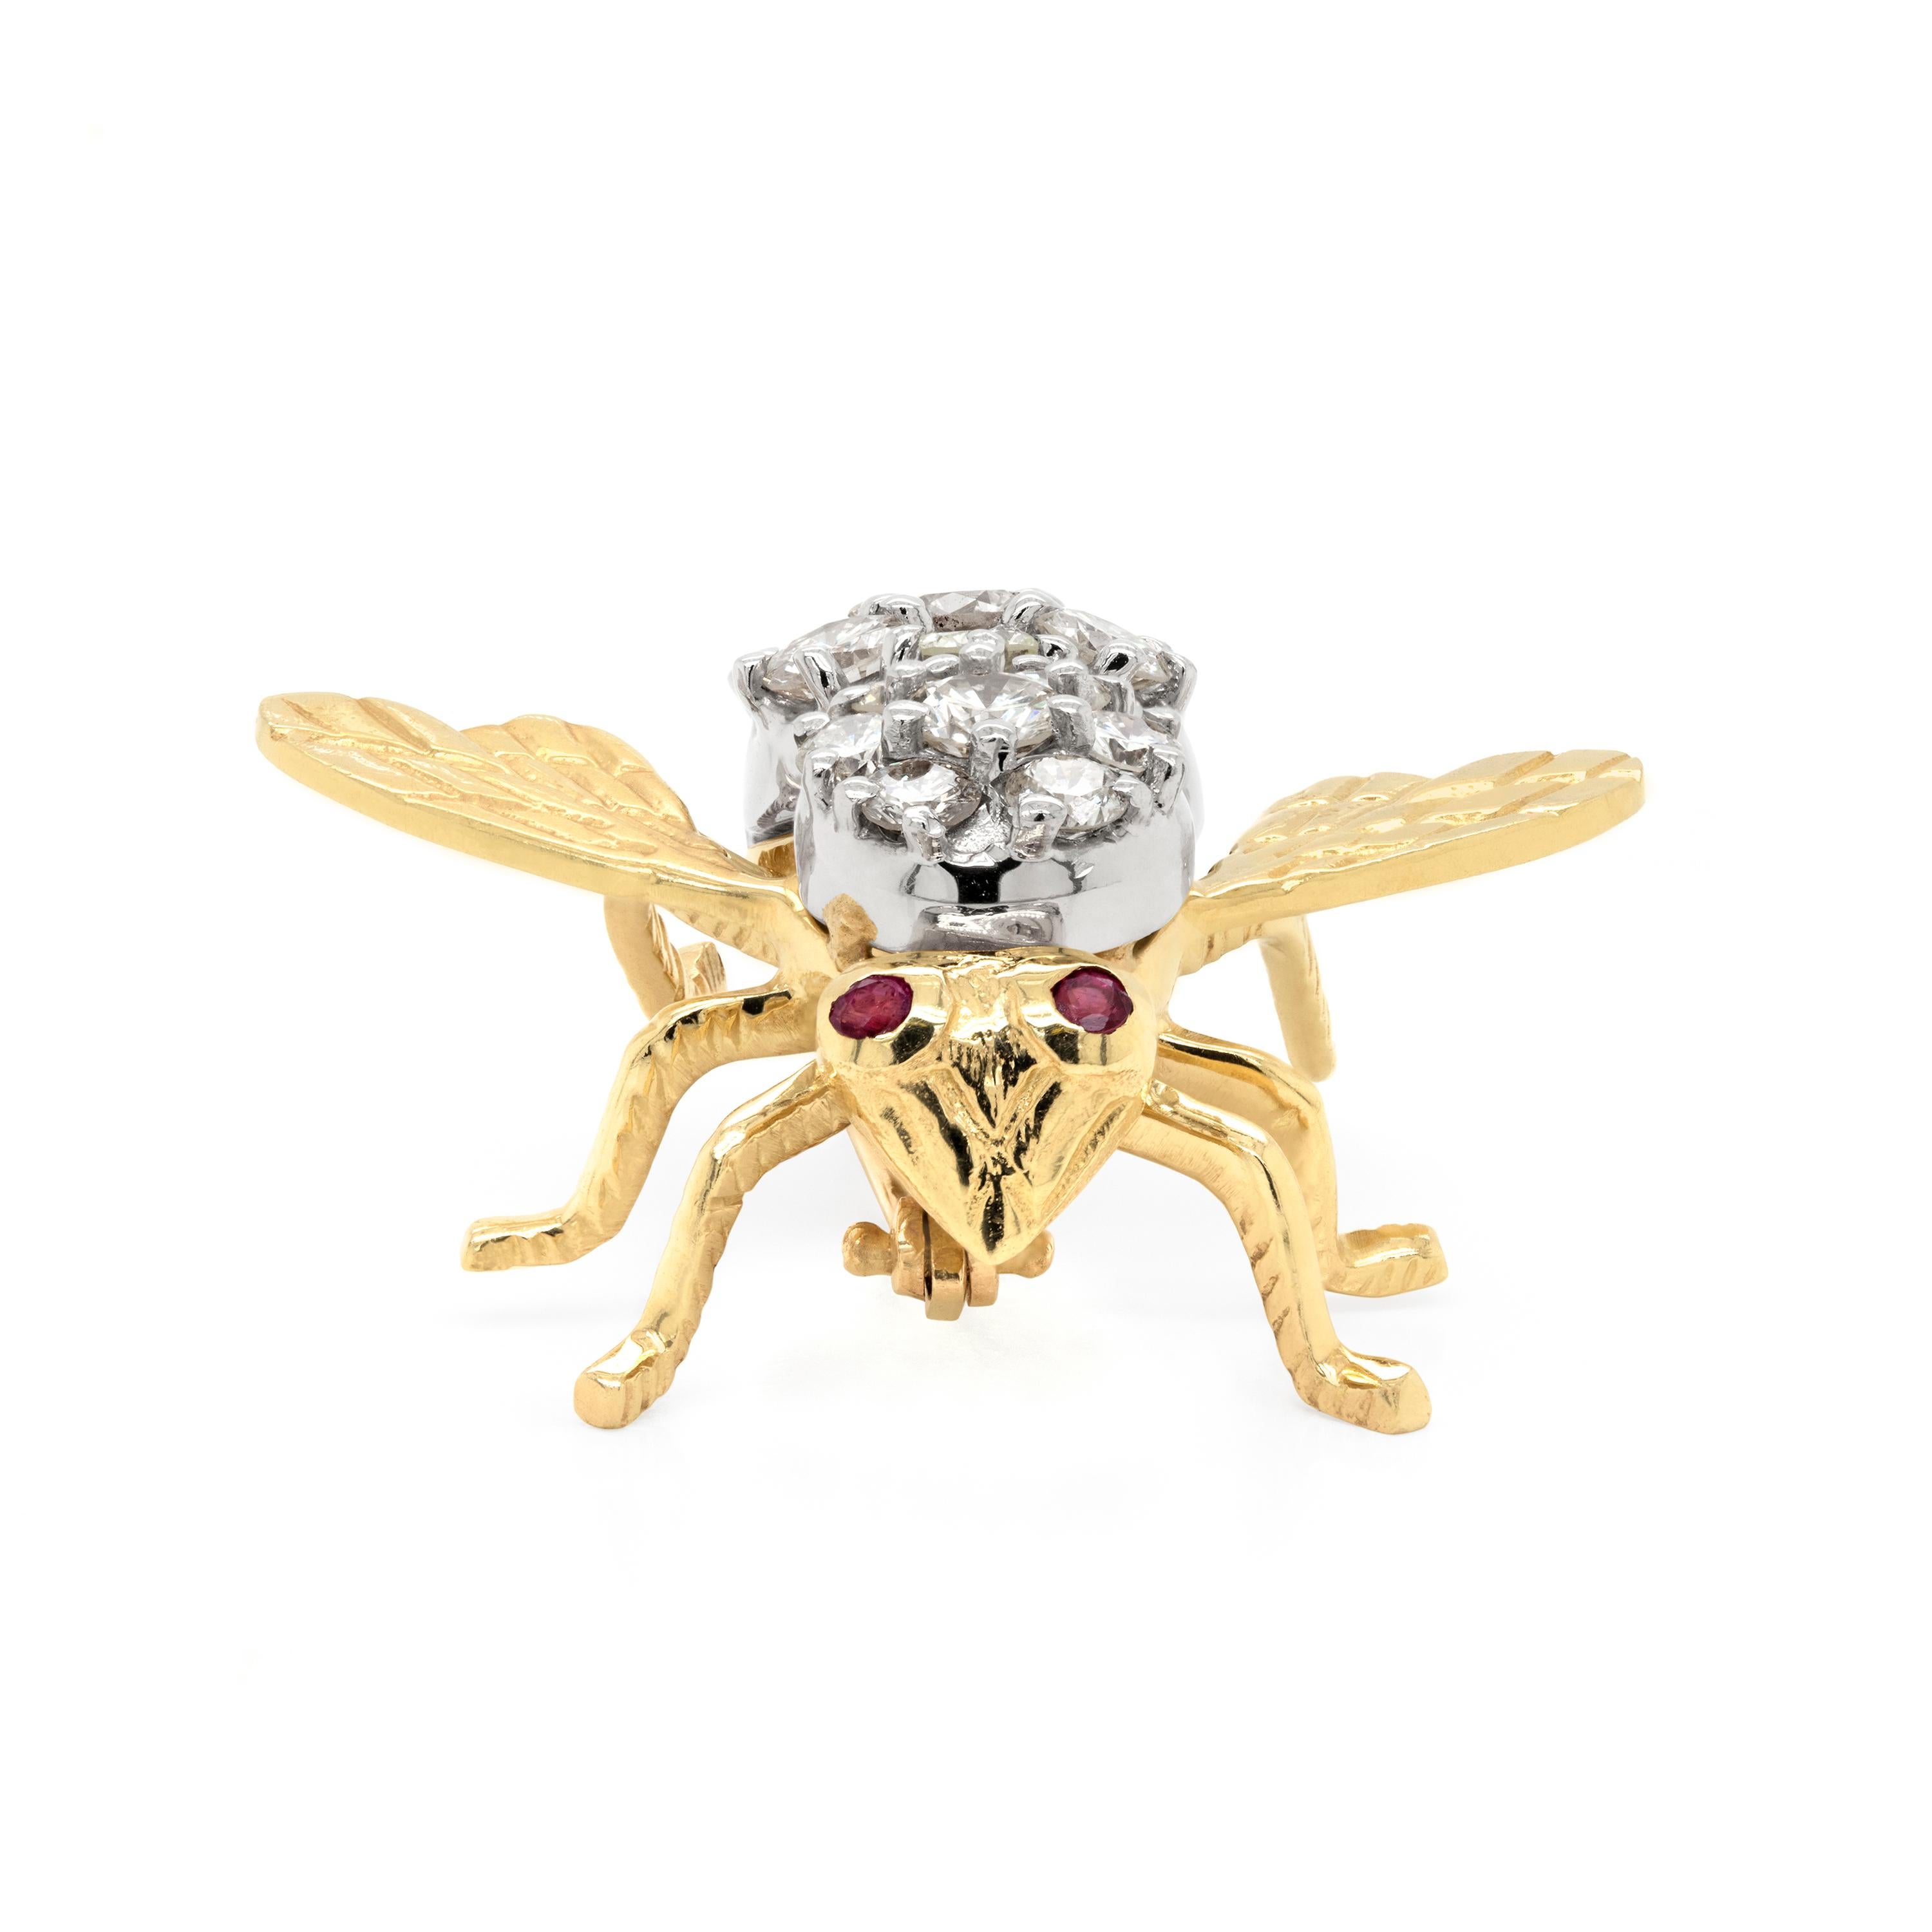 This charming brooch is inlaid with 19 round brilliant cut diamonds, all claw set inside the bug's body, totaling to an approximate weight of 2.00 carat. The bee is further set with two round cut rubies rub over set for its eyes. The upper part of